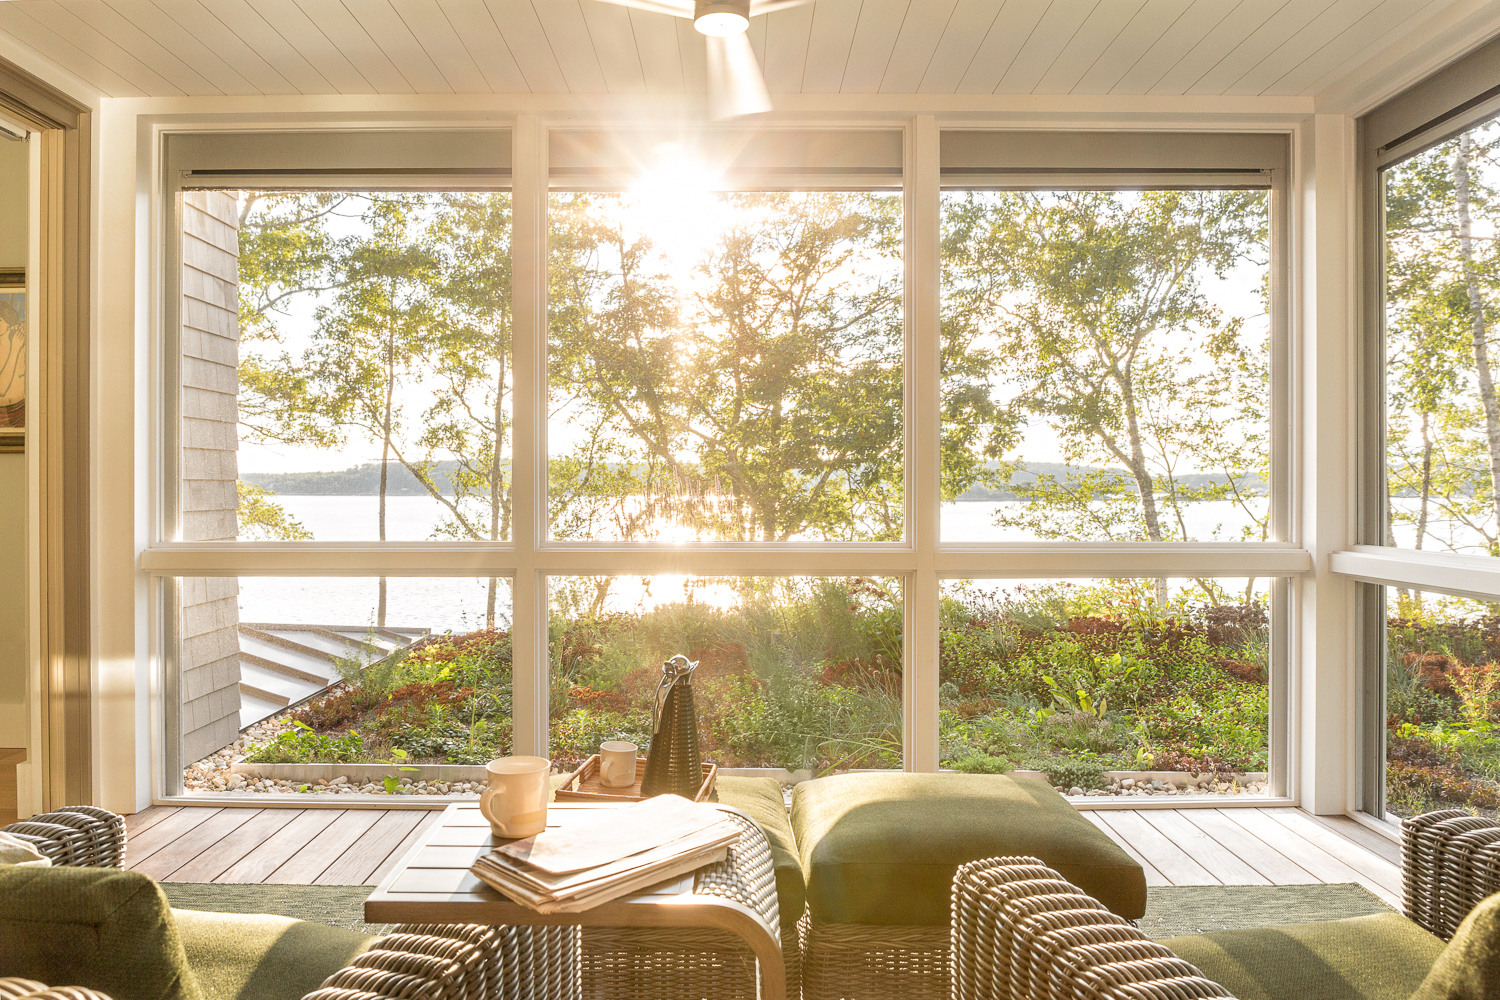 Screen porch off the primary bedroom overlooking the green roof with views to the ocean